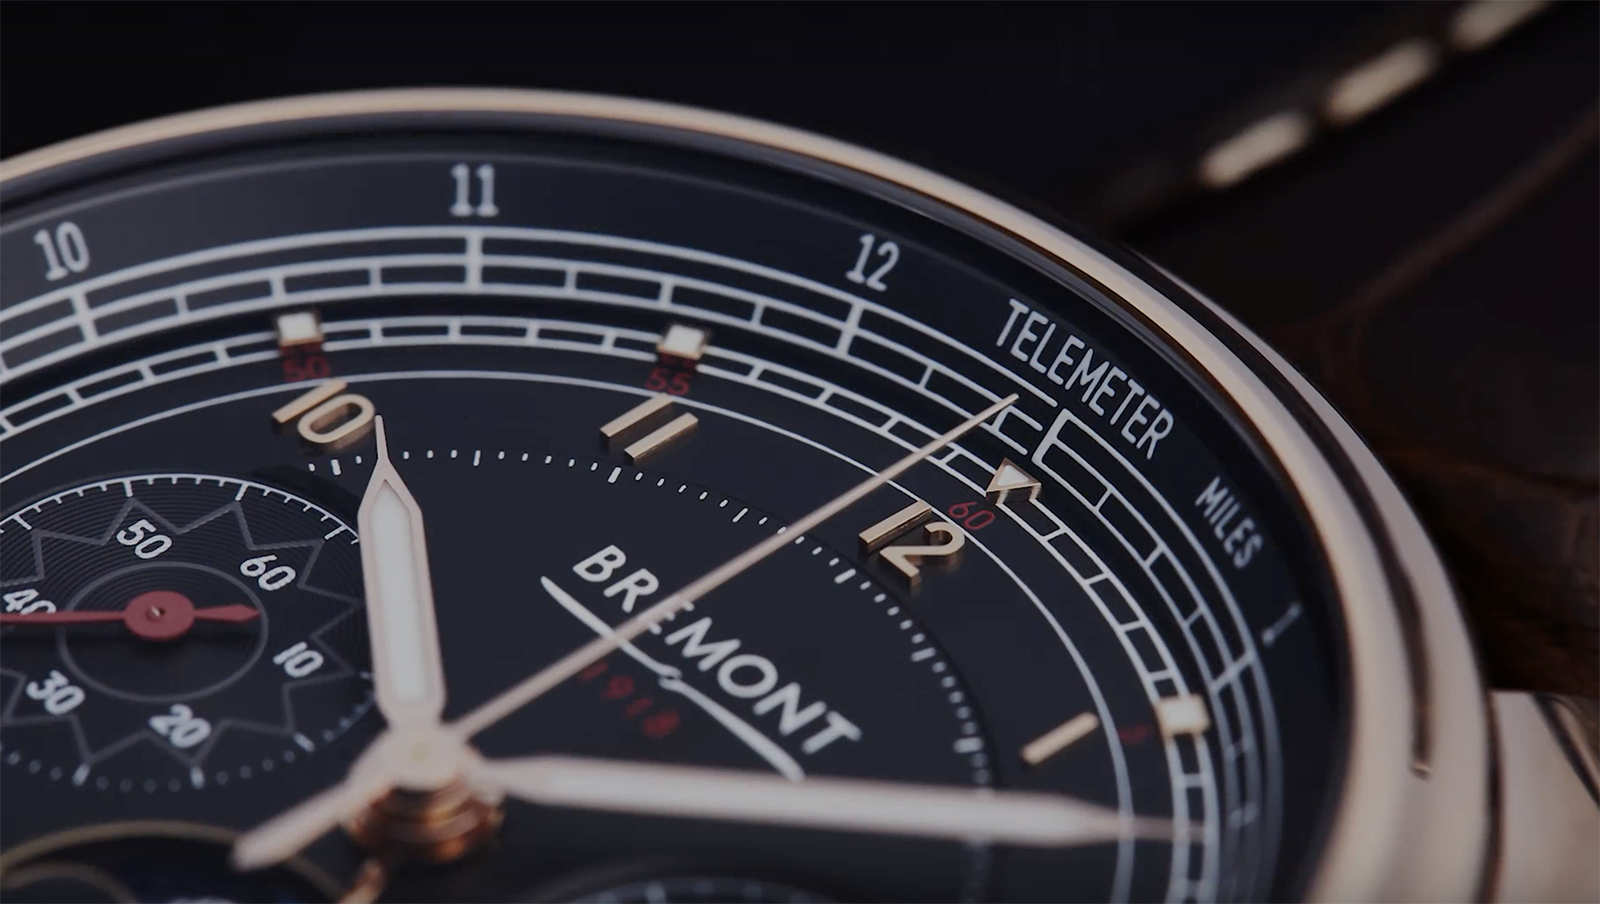 BREMONT 1918 Limited Edition RG